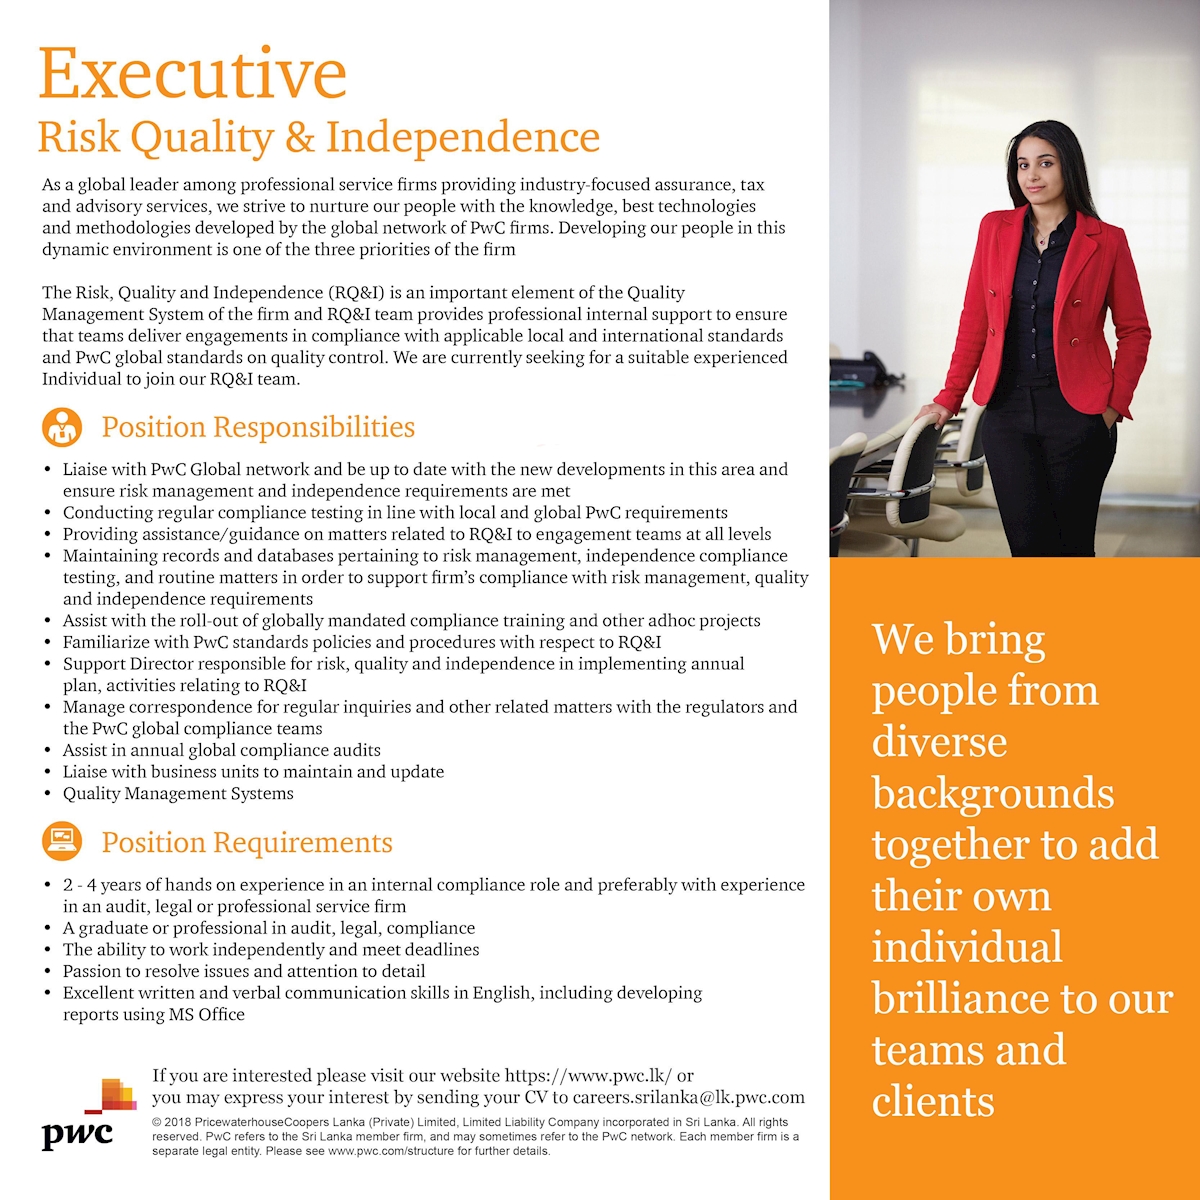 Executive - Risk Quality and Independence 